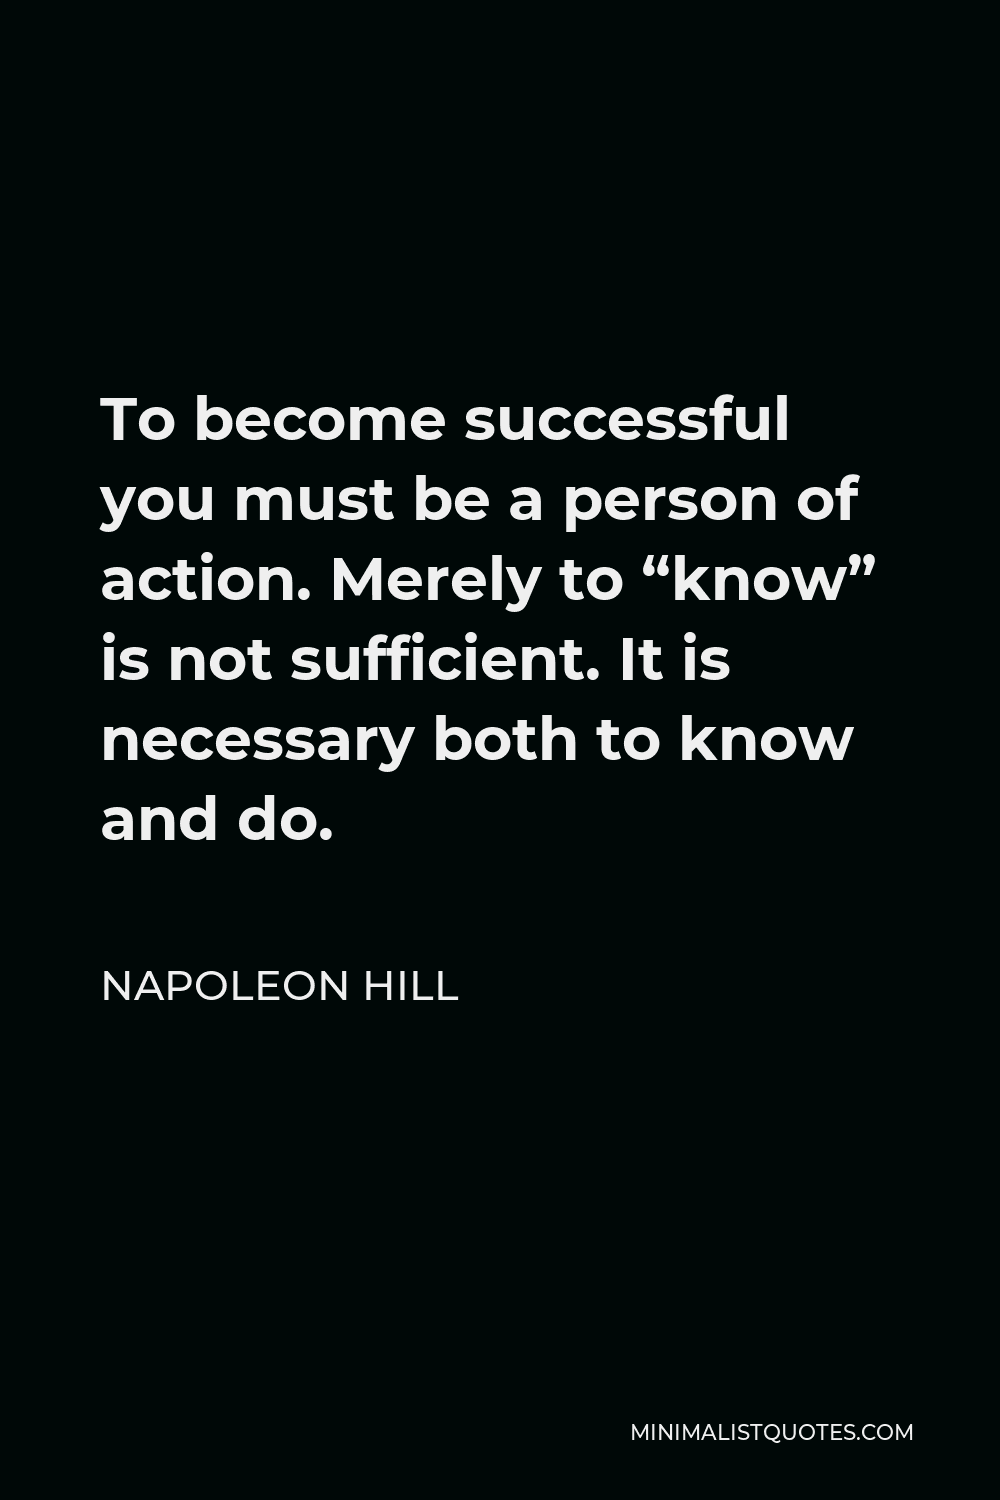 Napoleon Hill Quote - To become successful you must be a person of action. Merely to “know” is not sufficient. It is necessary both to know and do.